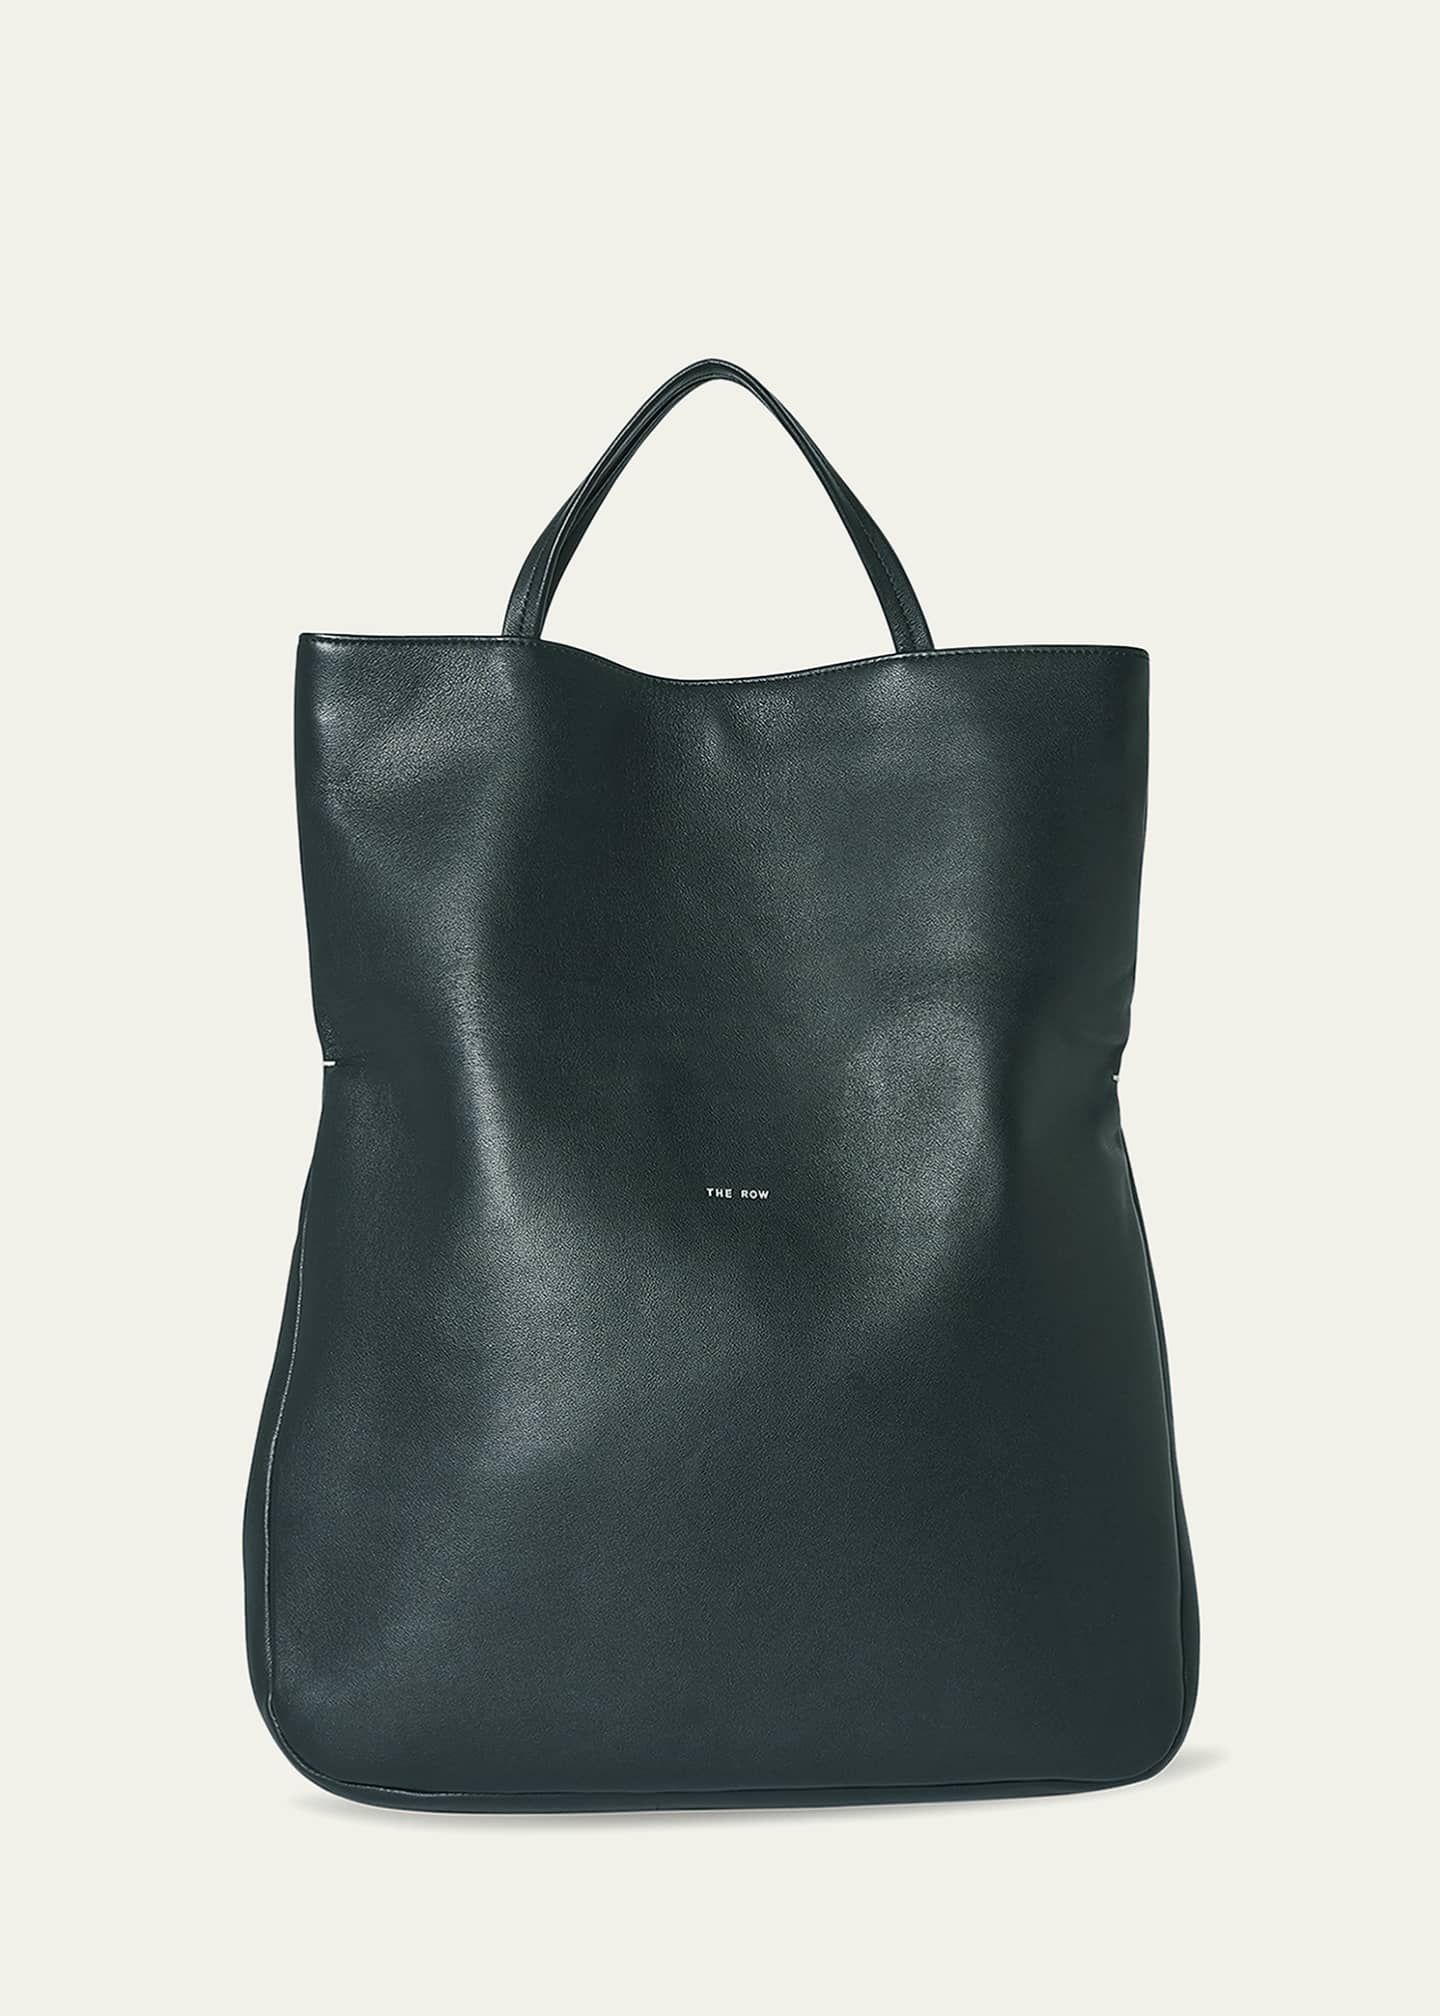 THE ROW Everett Tote Bag in Leather - Bergdorf Goodman